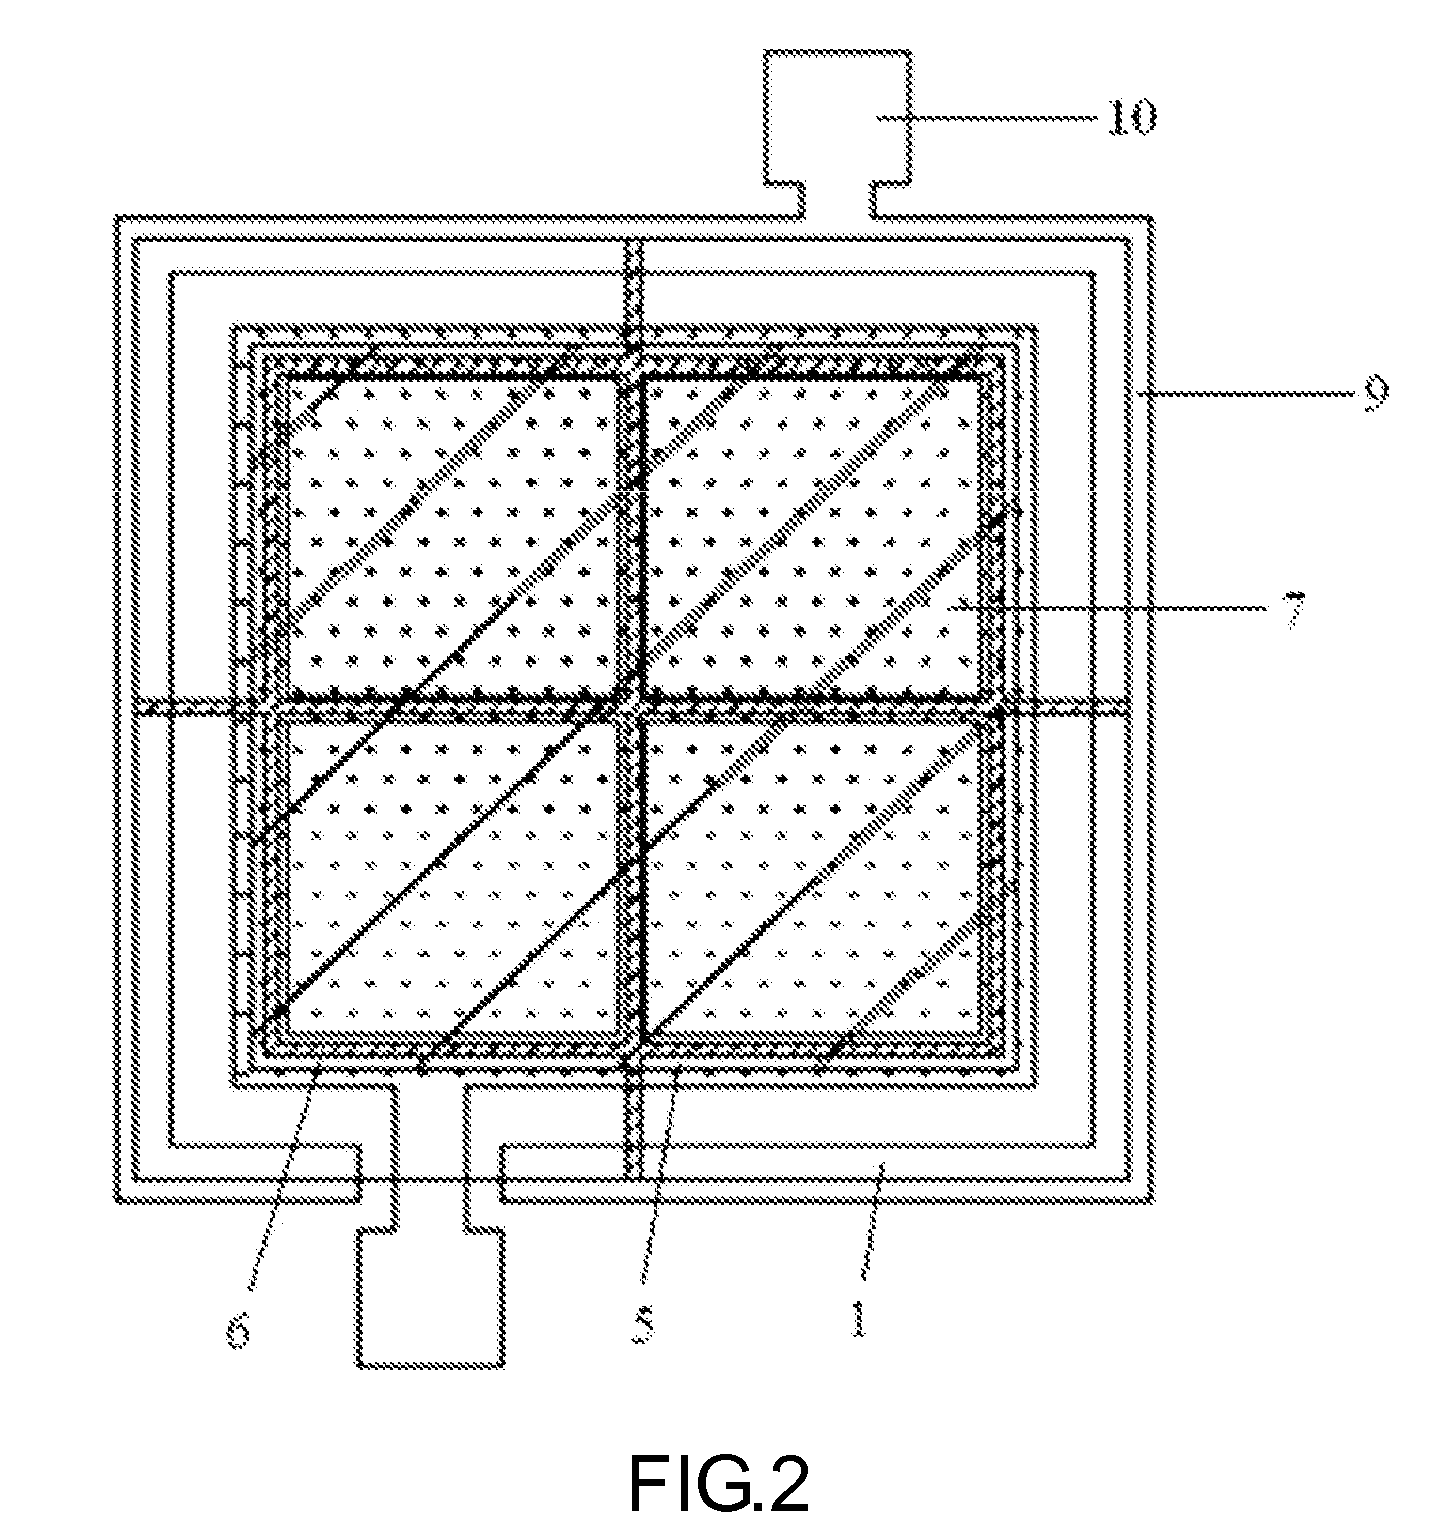 Light-emitting device having a patterned substrate